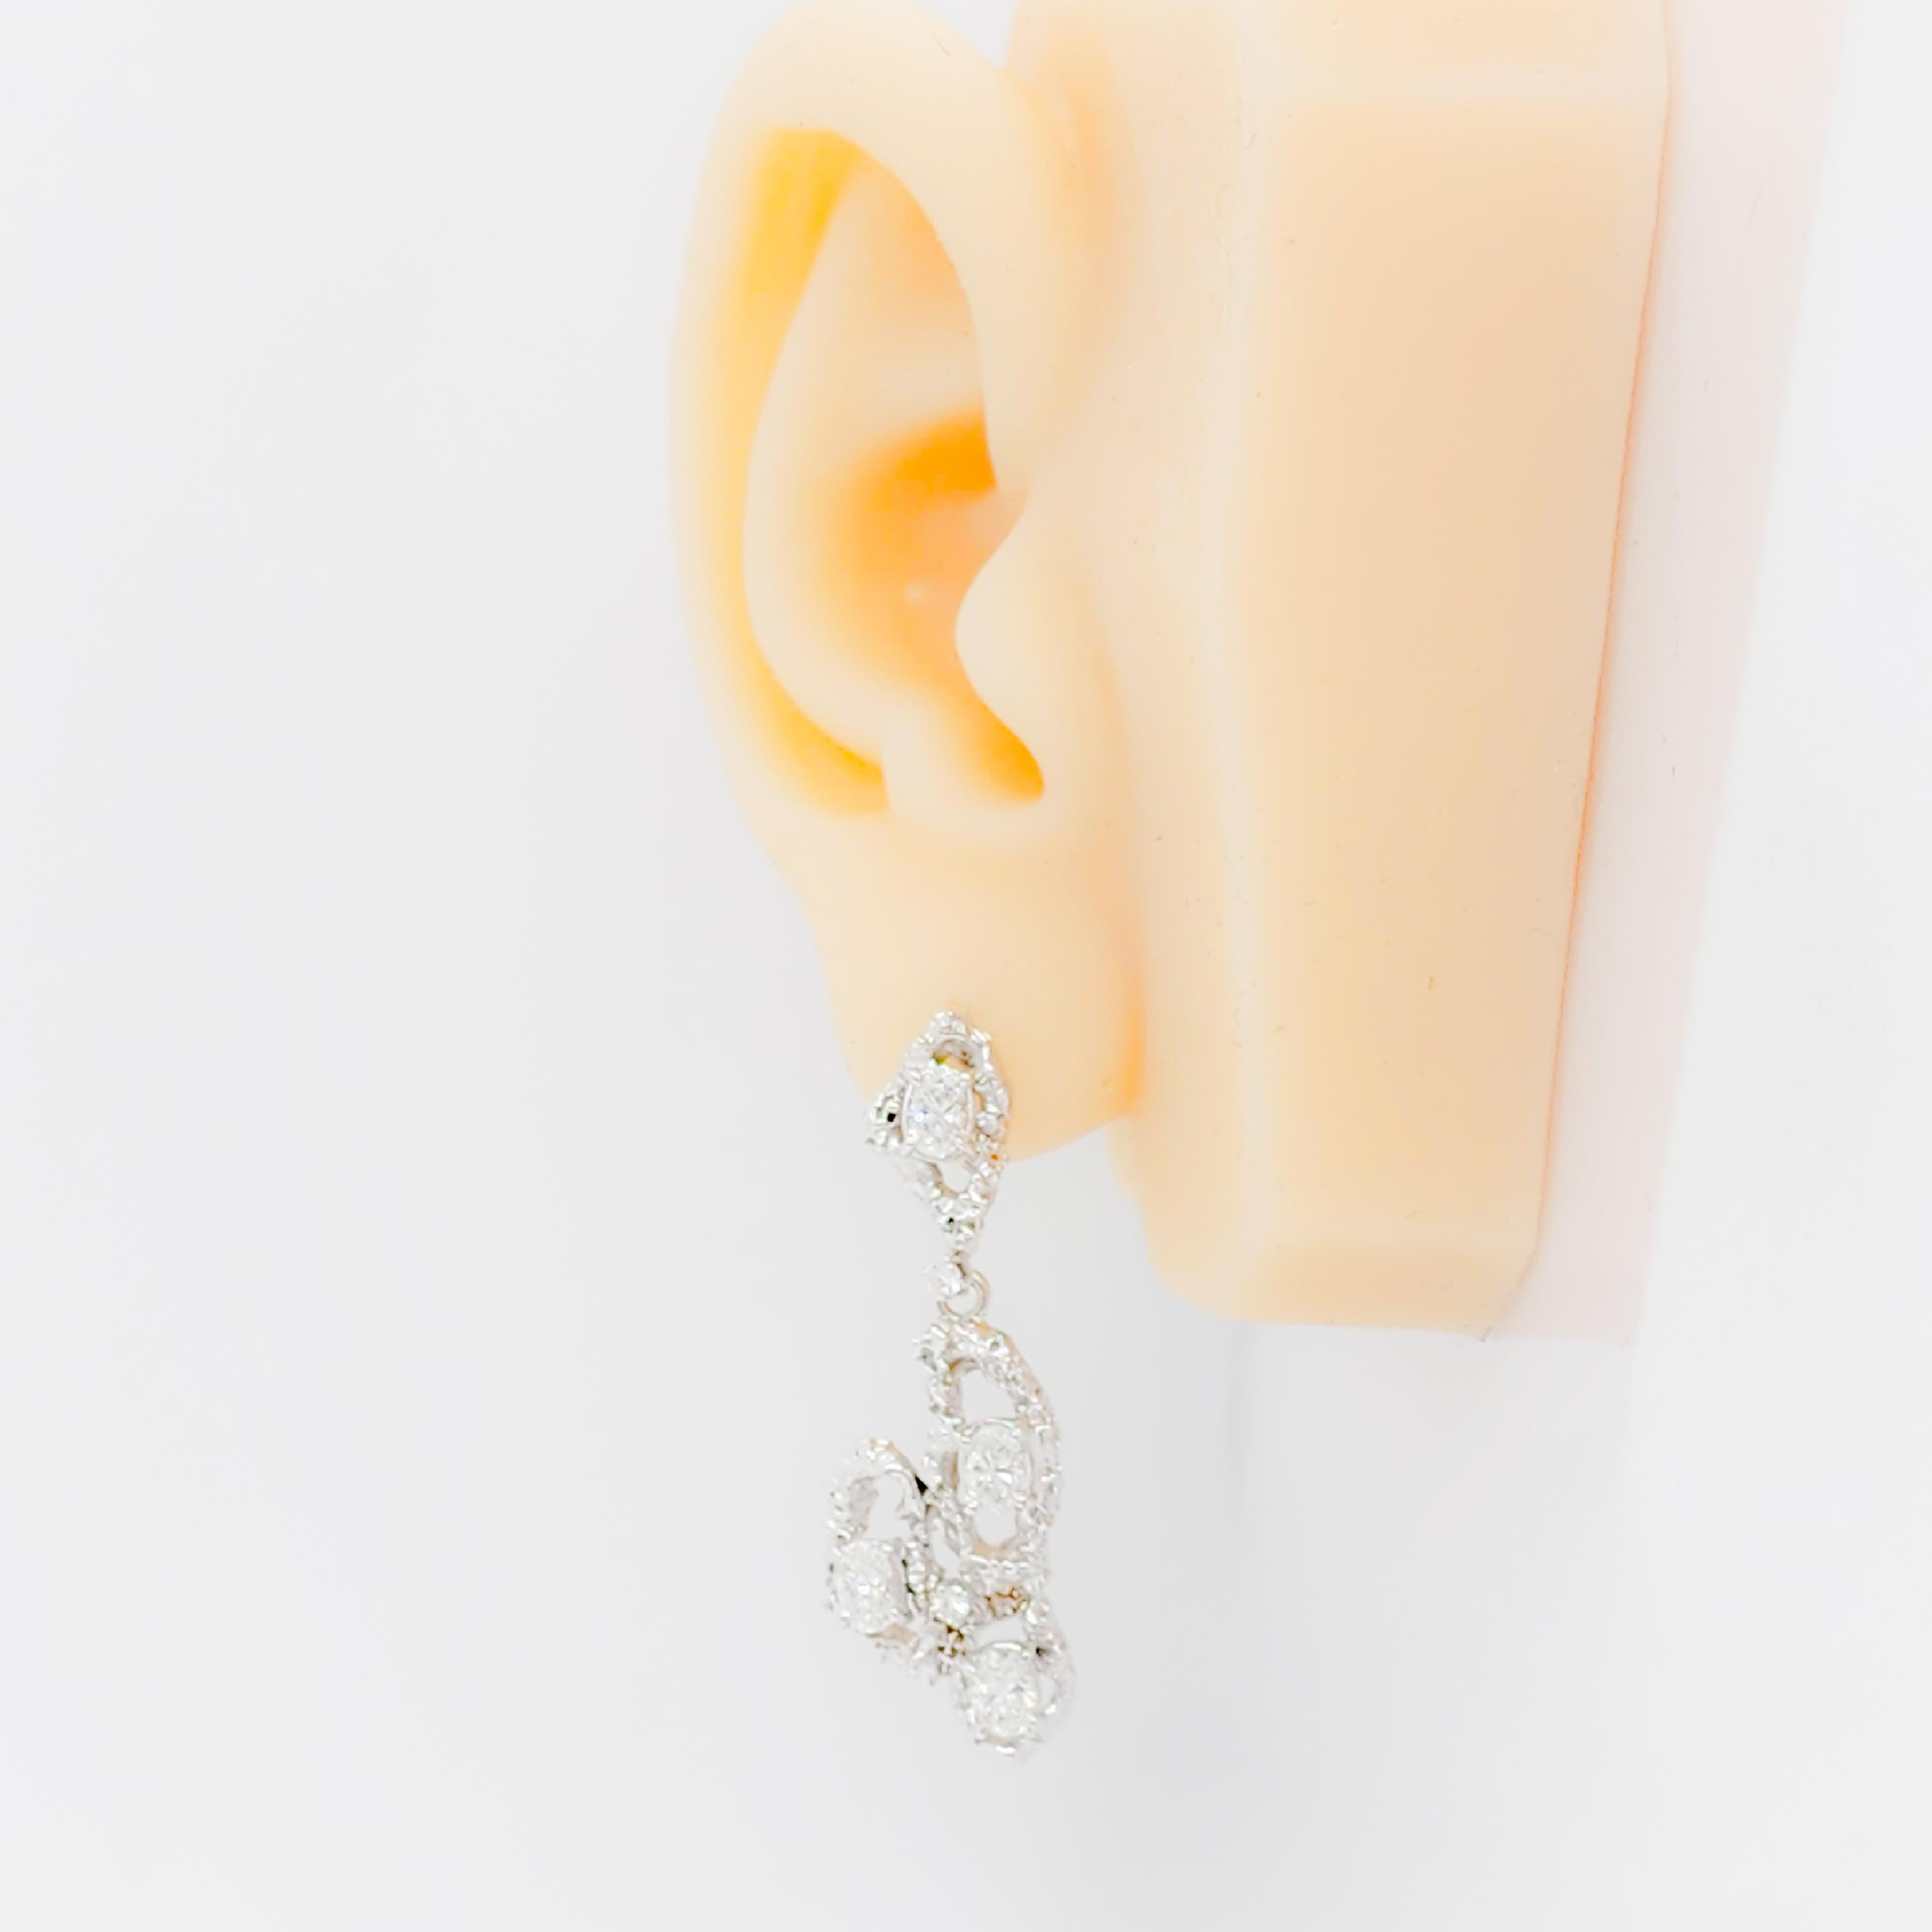 Beautiful 3.00 ct. good quality white diamond ovals and rounds.  Handmade in 18k white gold.  A great pair of earrings that can dress up any outfit.